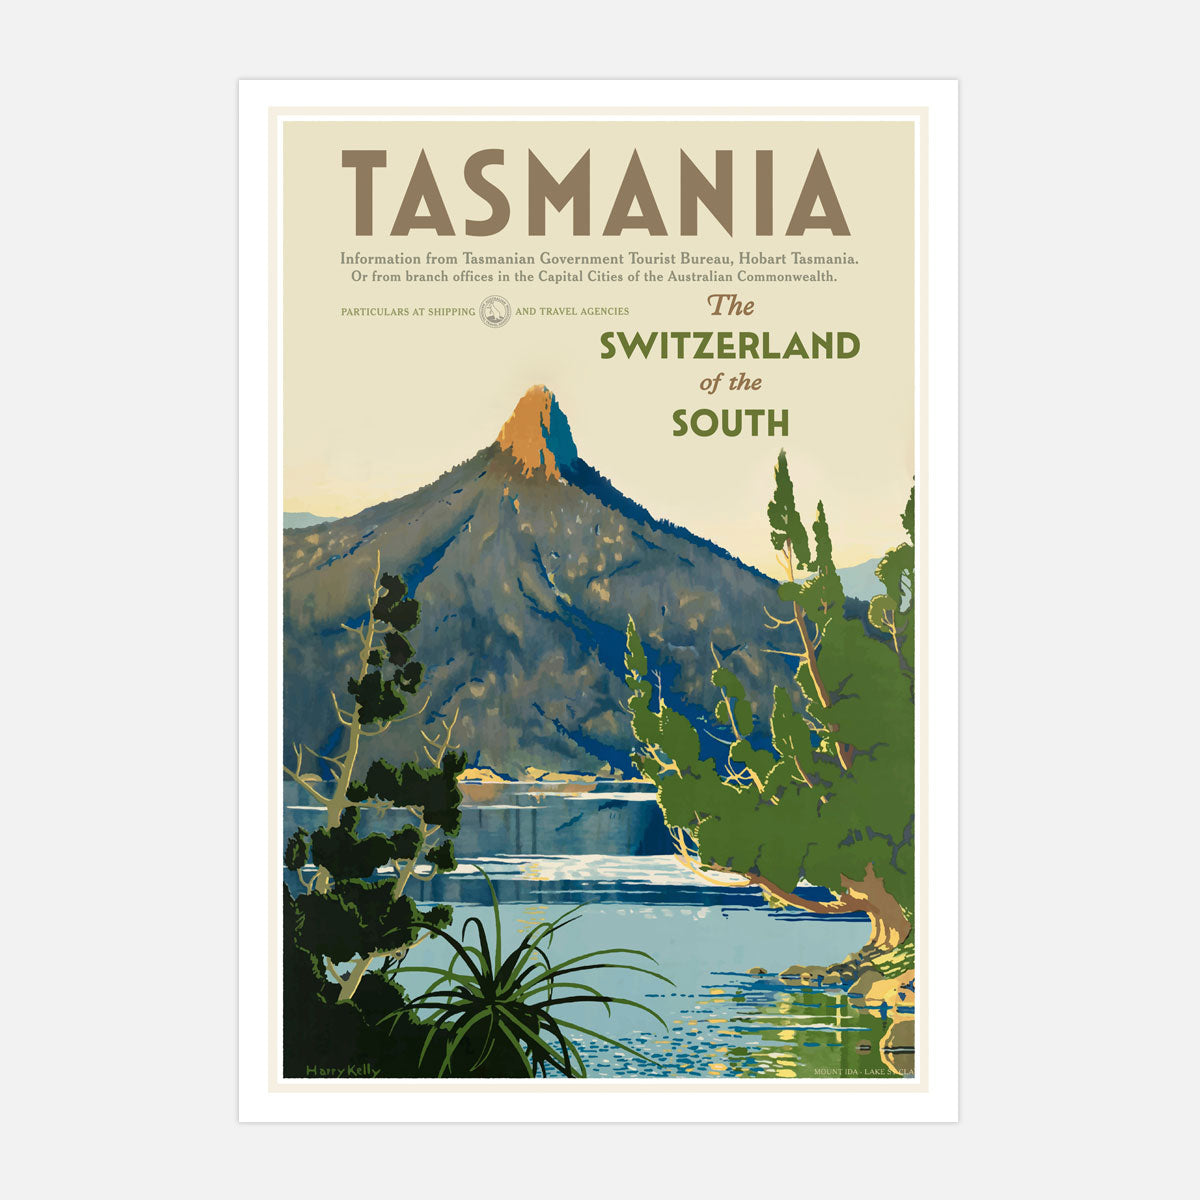 Tasmania vintage retro advertising poster from Places We Luv